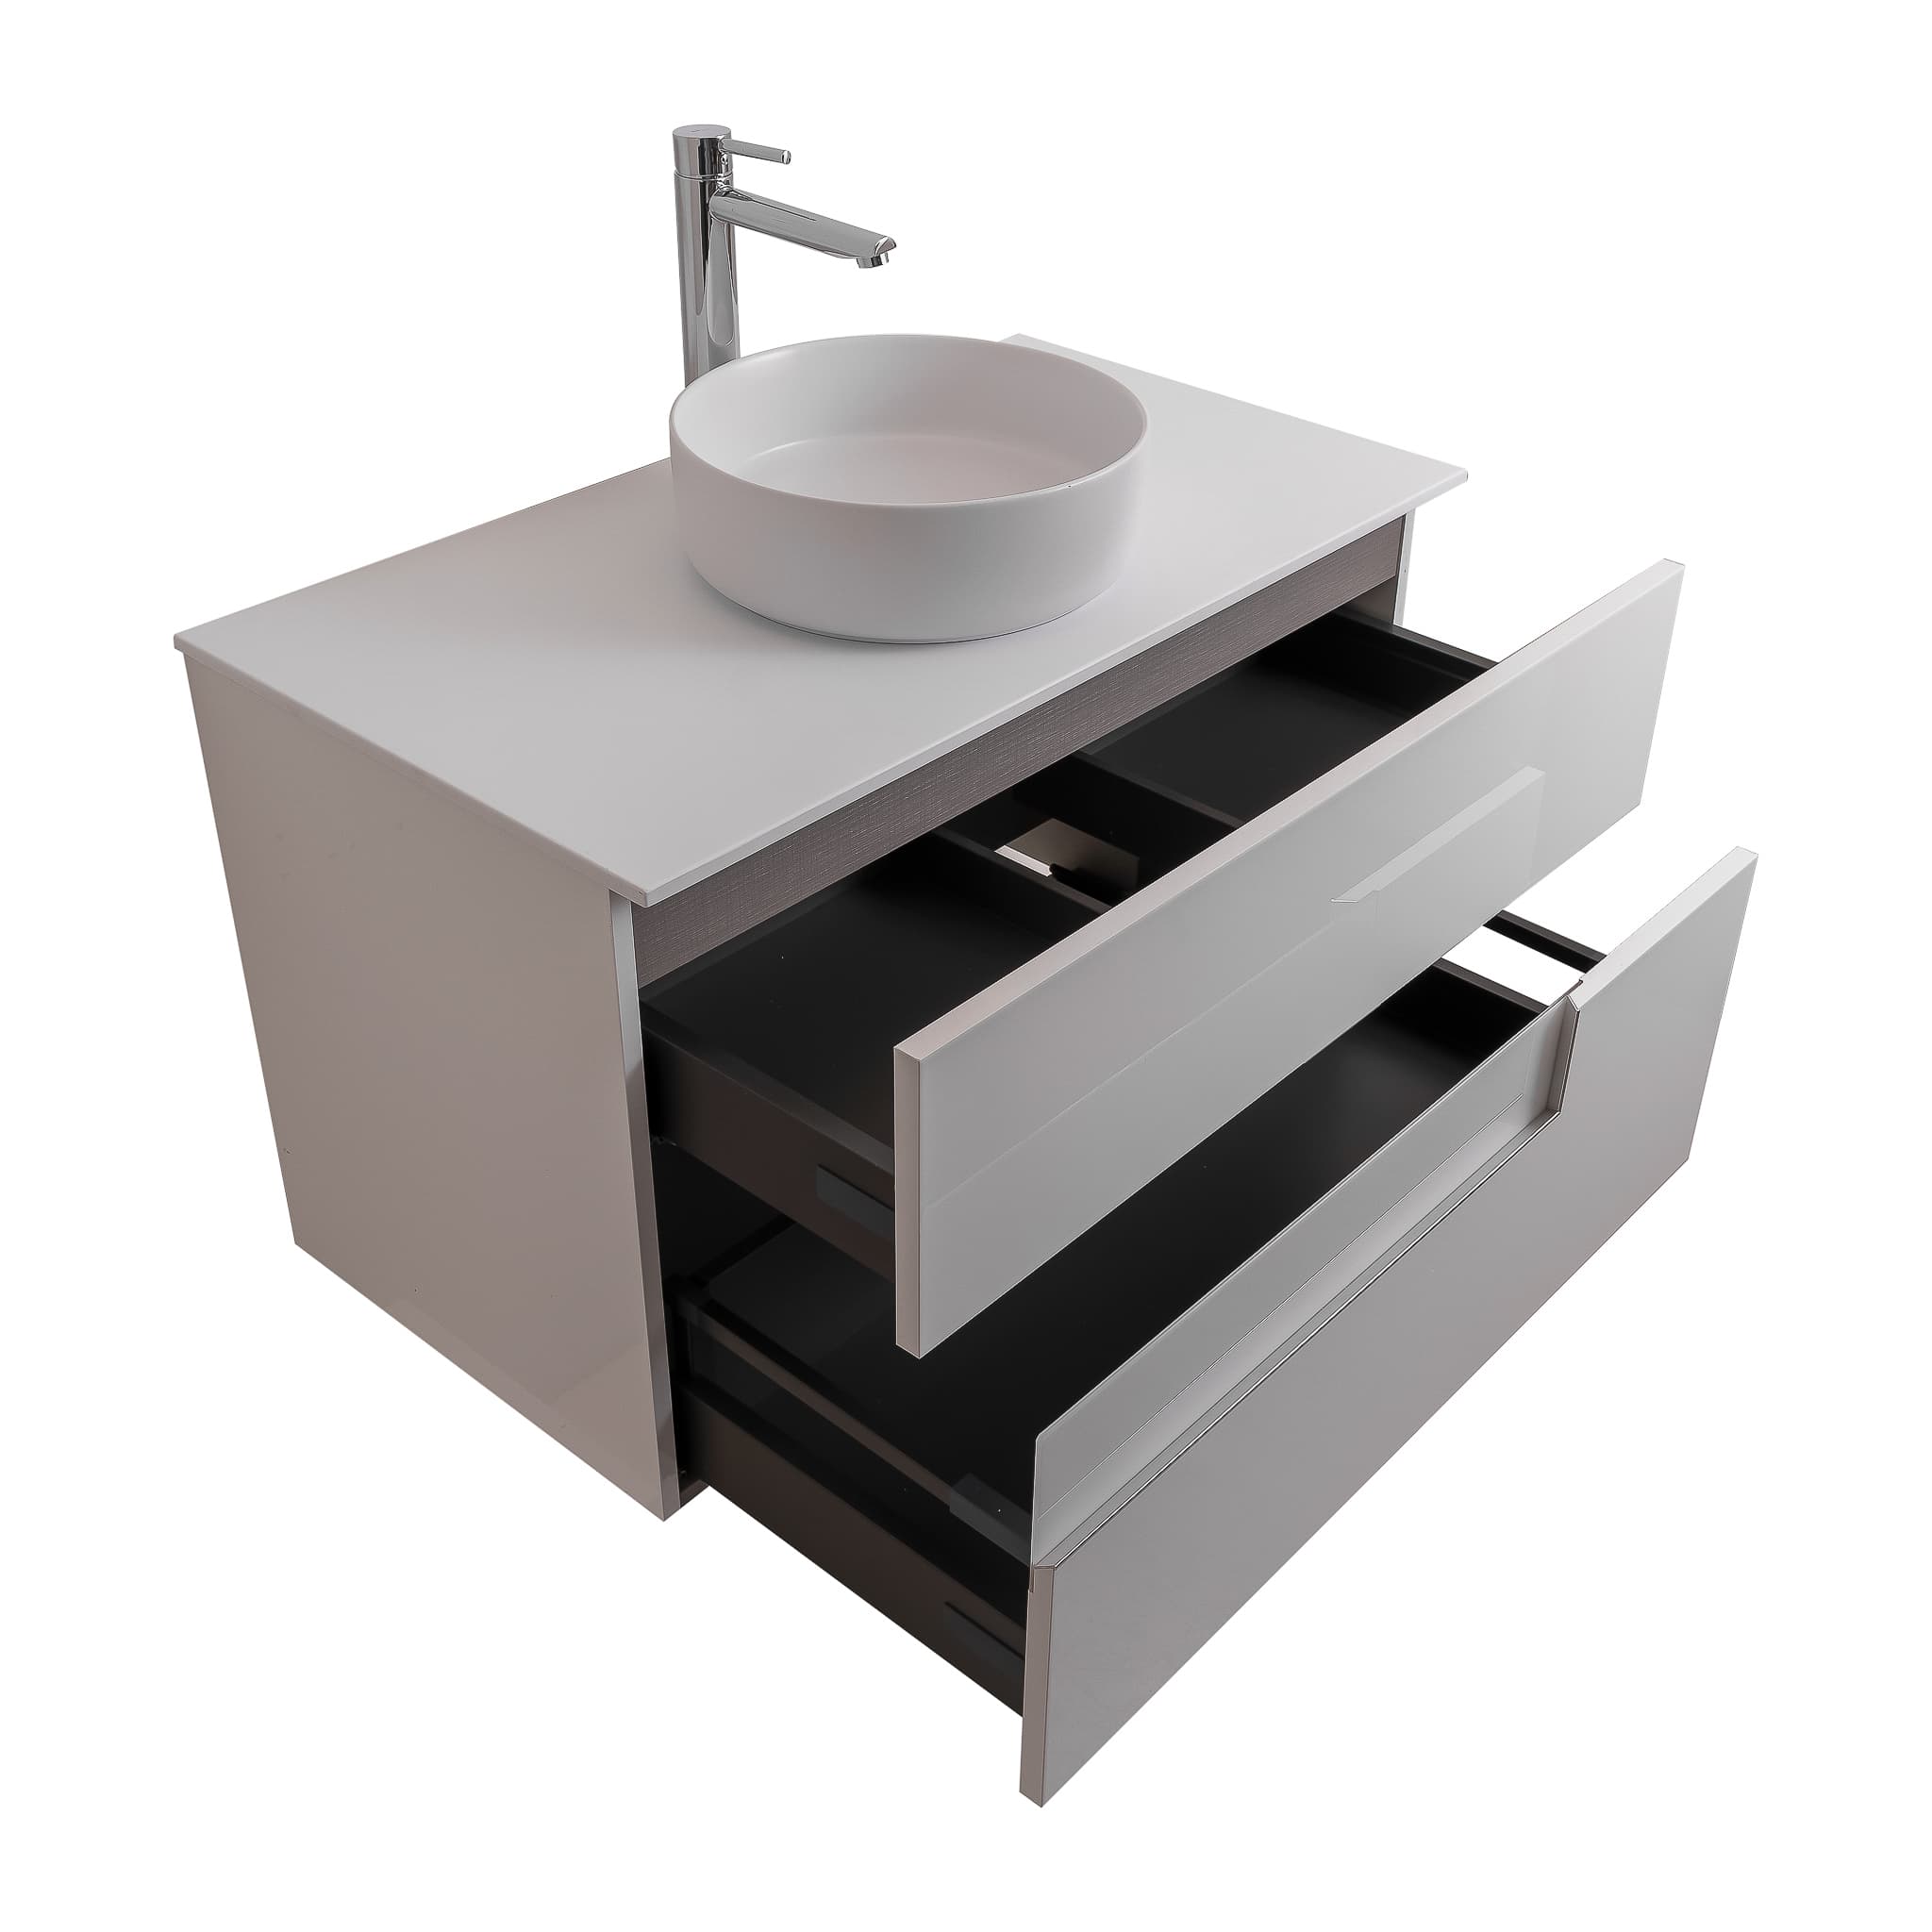 Vision 31.5 White High Gloss Cabinet, Ares White Top And Ares White Ceramic Basin, Wall Mounted Modern Vanity Set